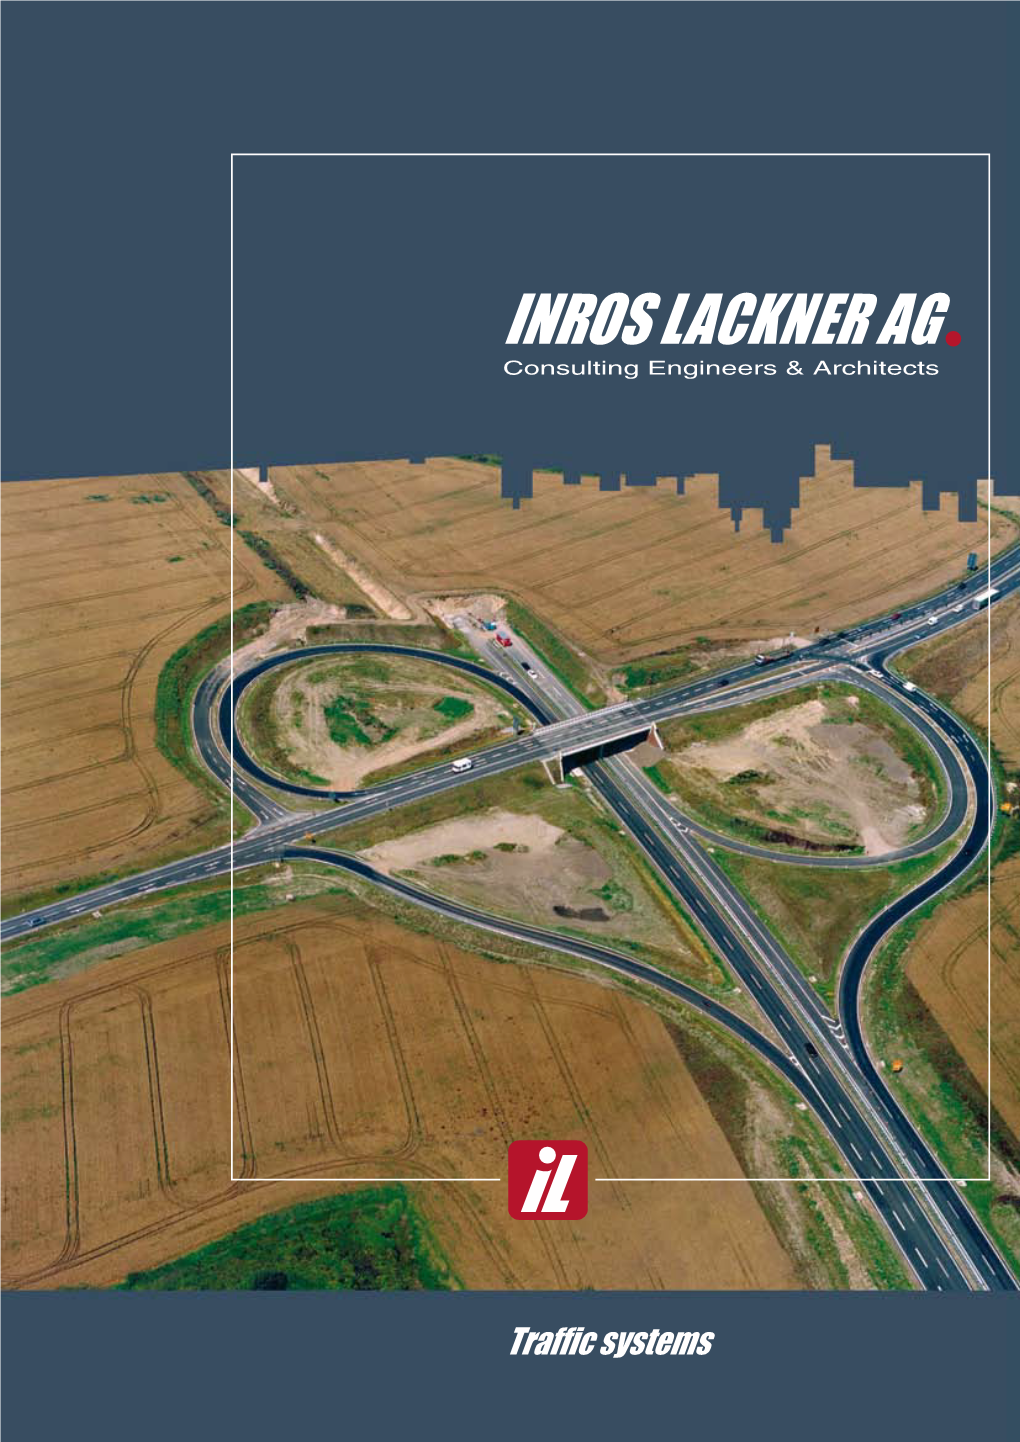 INROS LACKNER AG Consulting Engineers & Architects